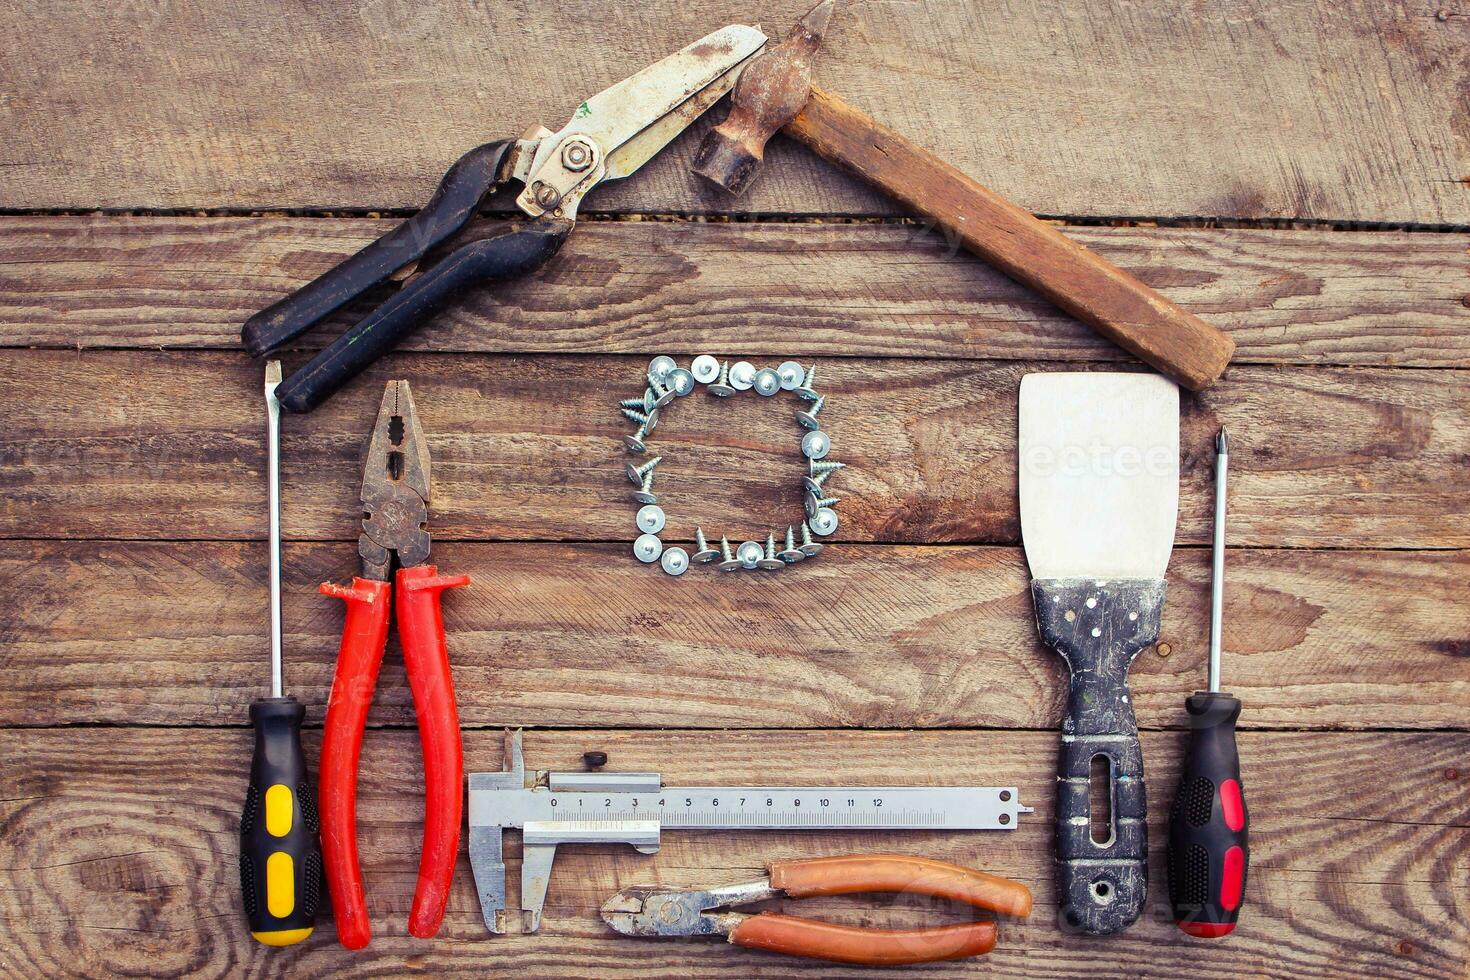 Construction tools in the form of house on wooden background. photo